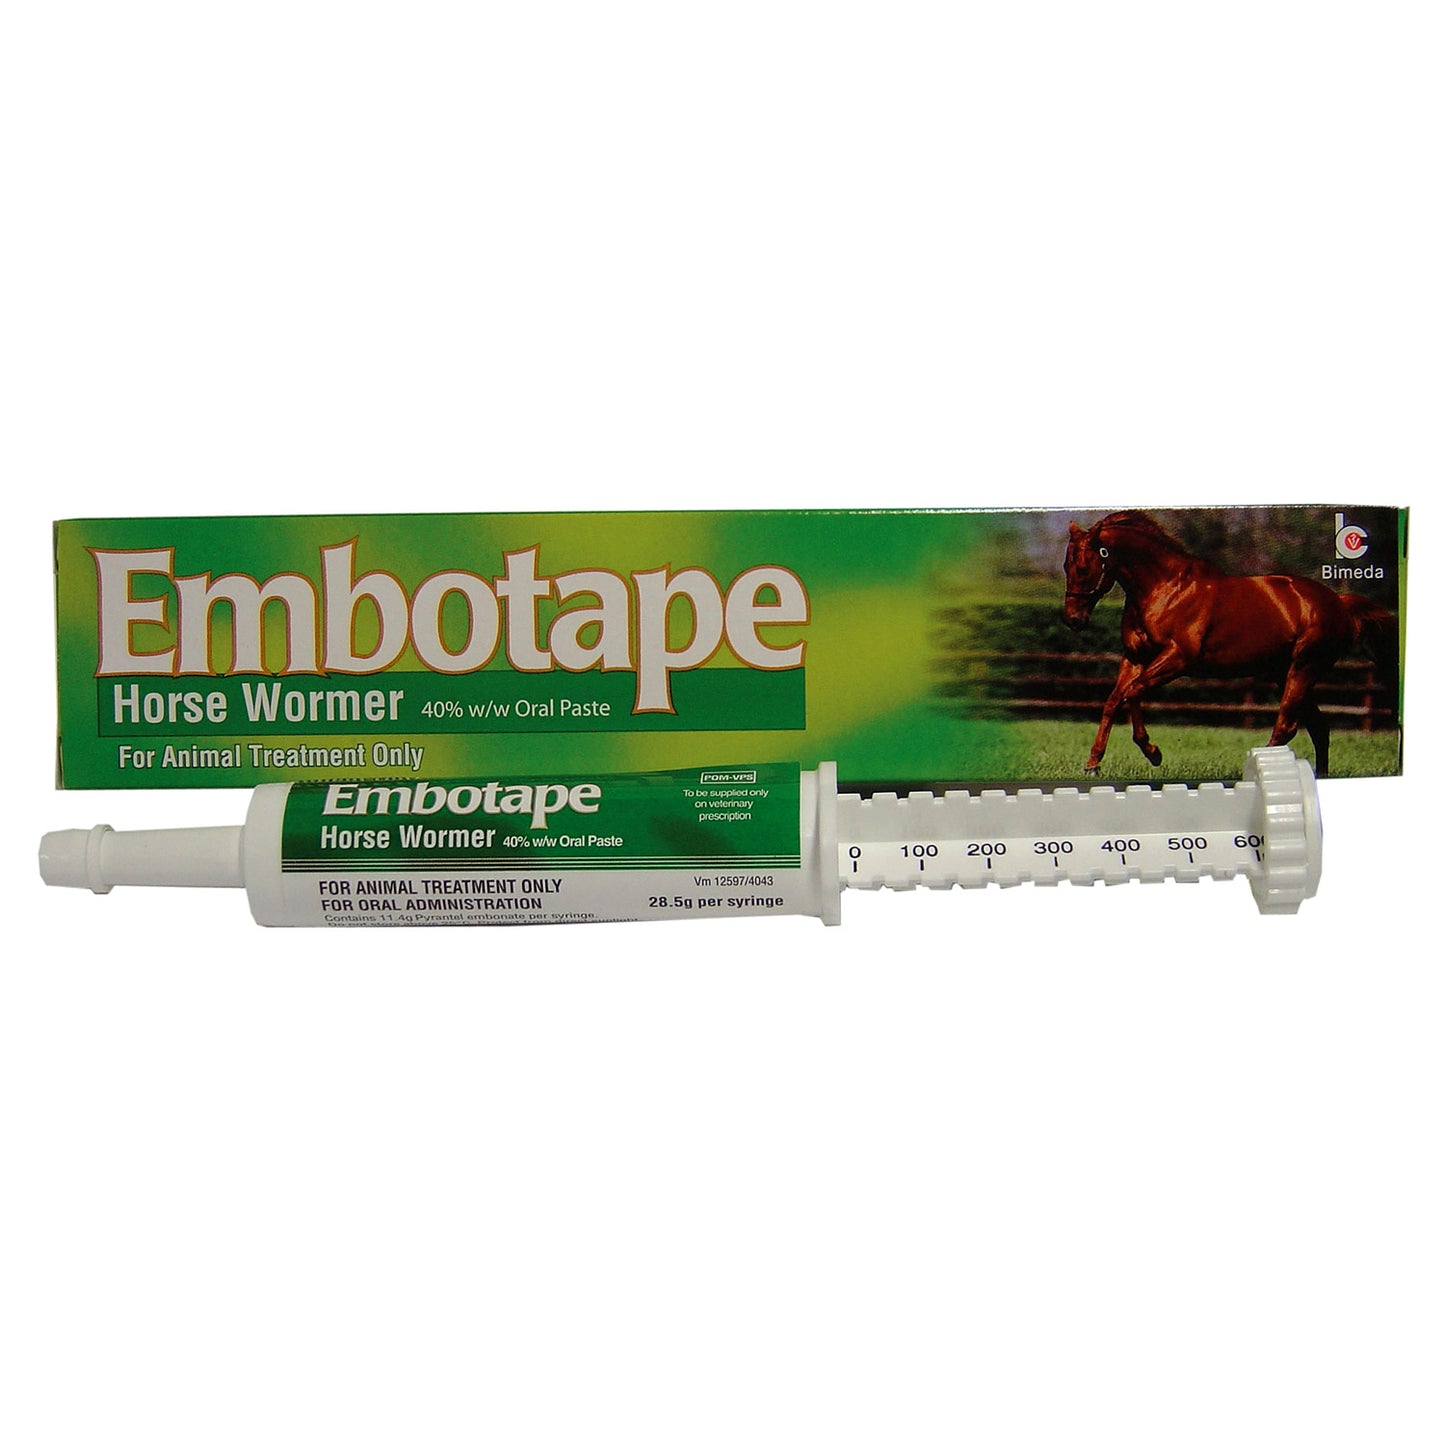 Embotape Oral Horse Wormer Paste 40% w/w